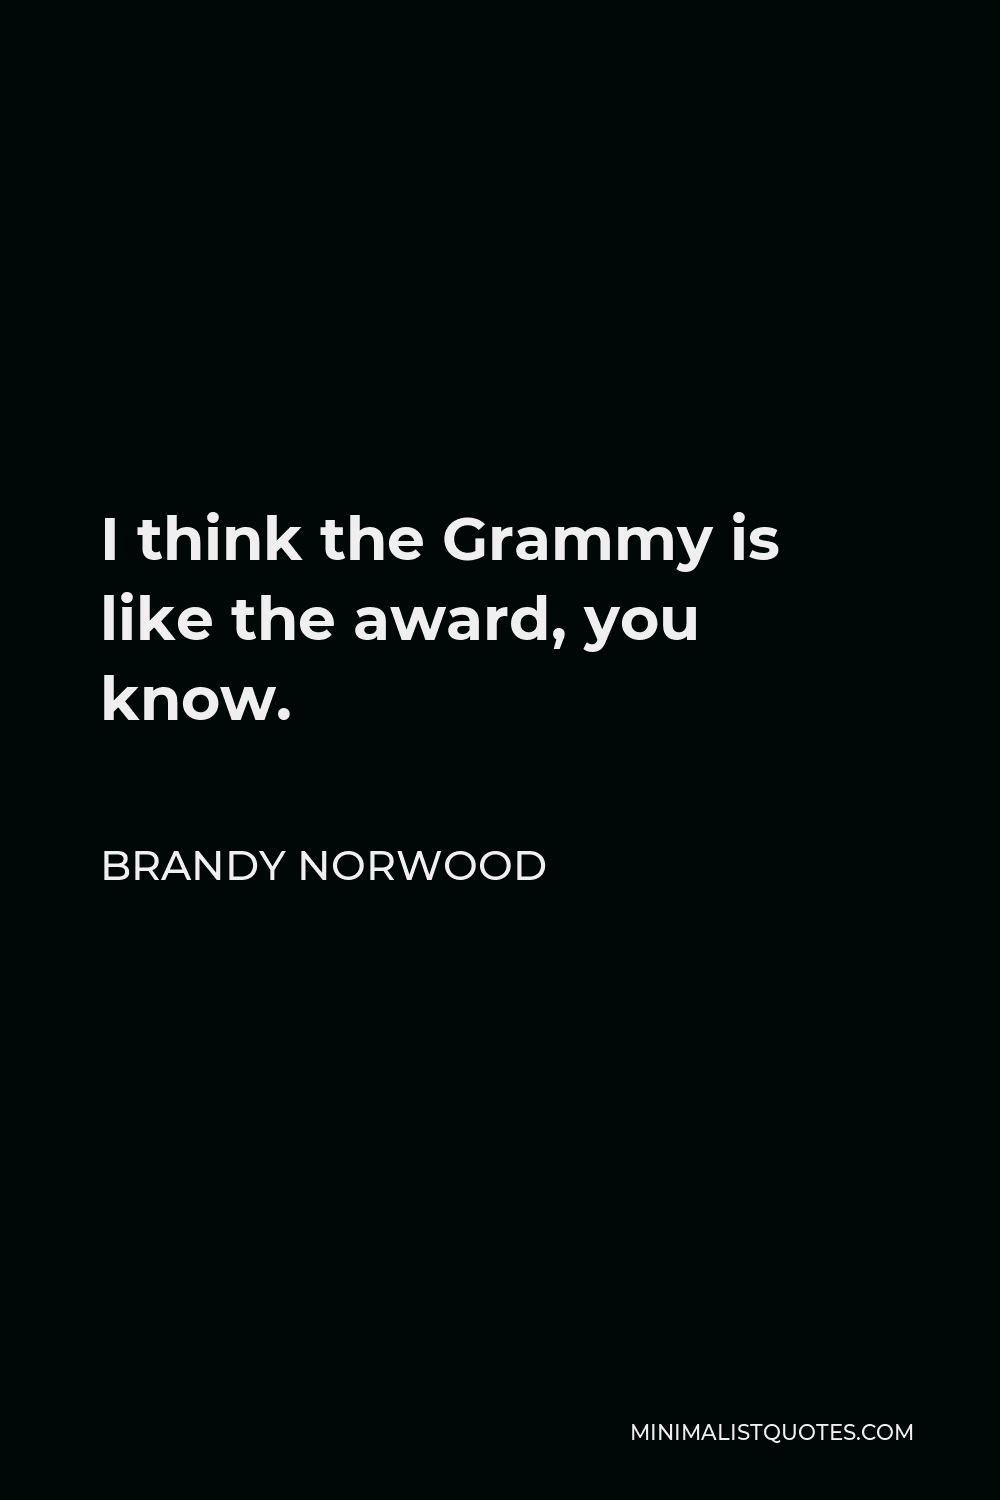 Brandy Norwood Quote - I think the Grammy is like the award, you know.